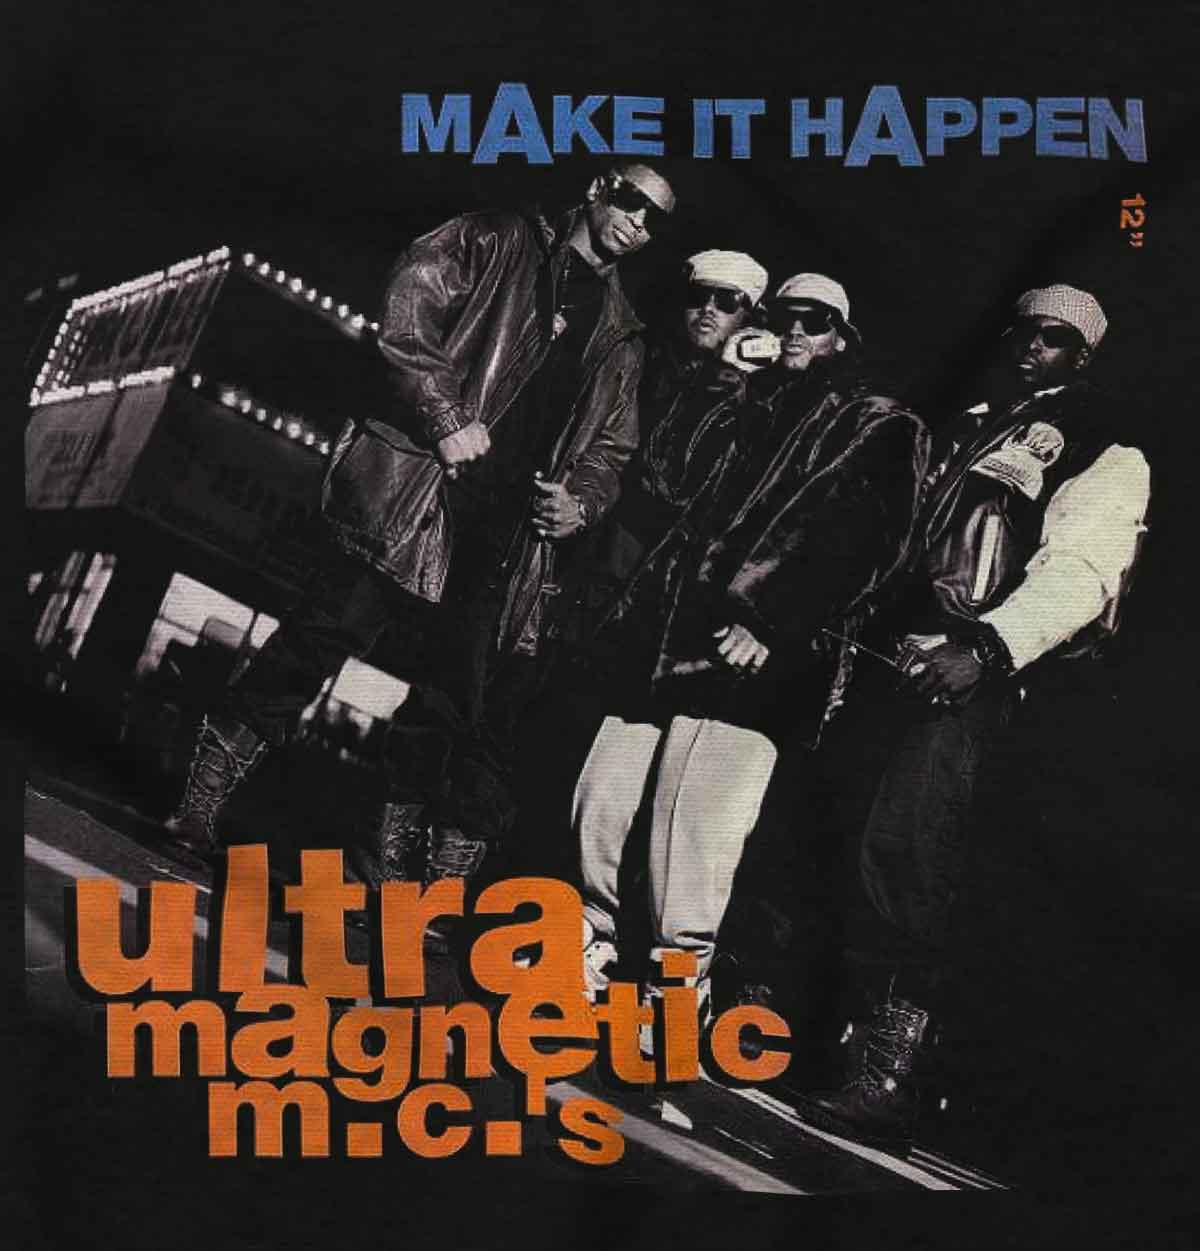 This image showcases the influential Ultramagnetic MCs, a hip hop crew from the Bronx, capturing their iconic style and representing the determination and hustle of hip hop culture.